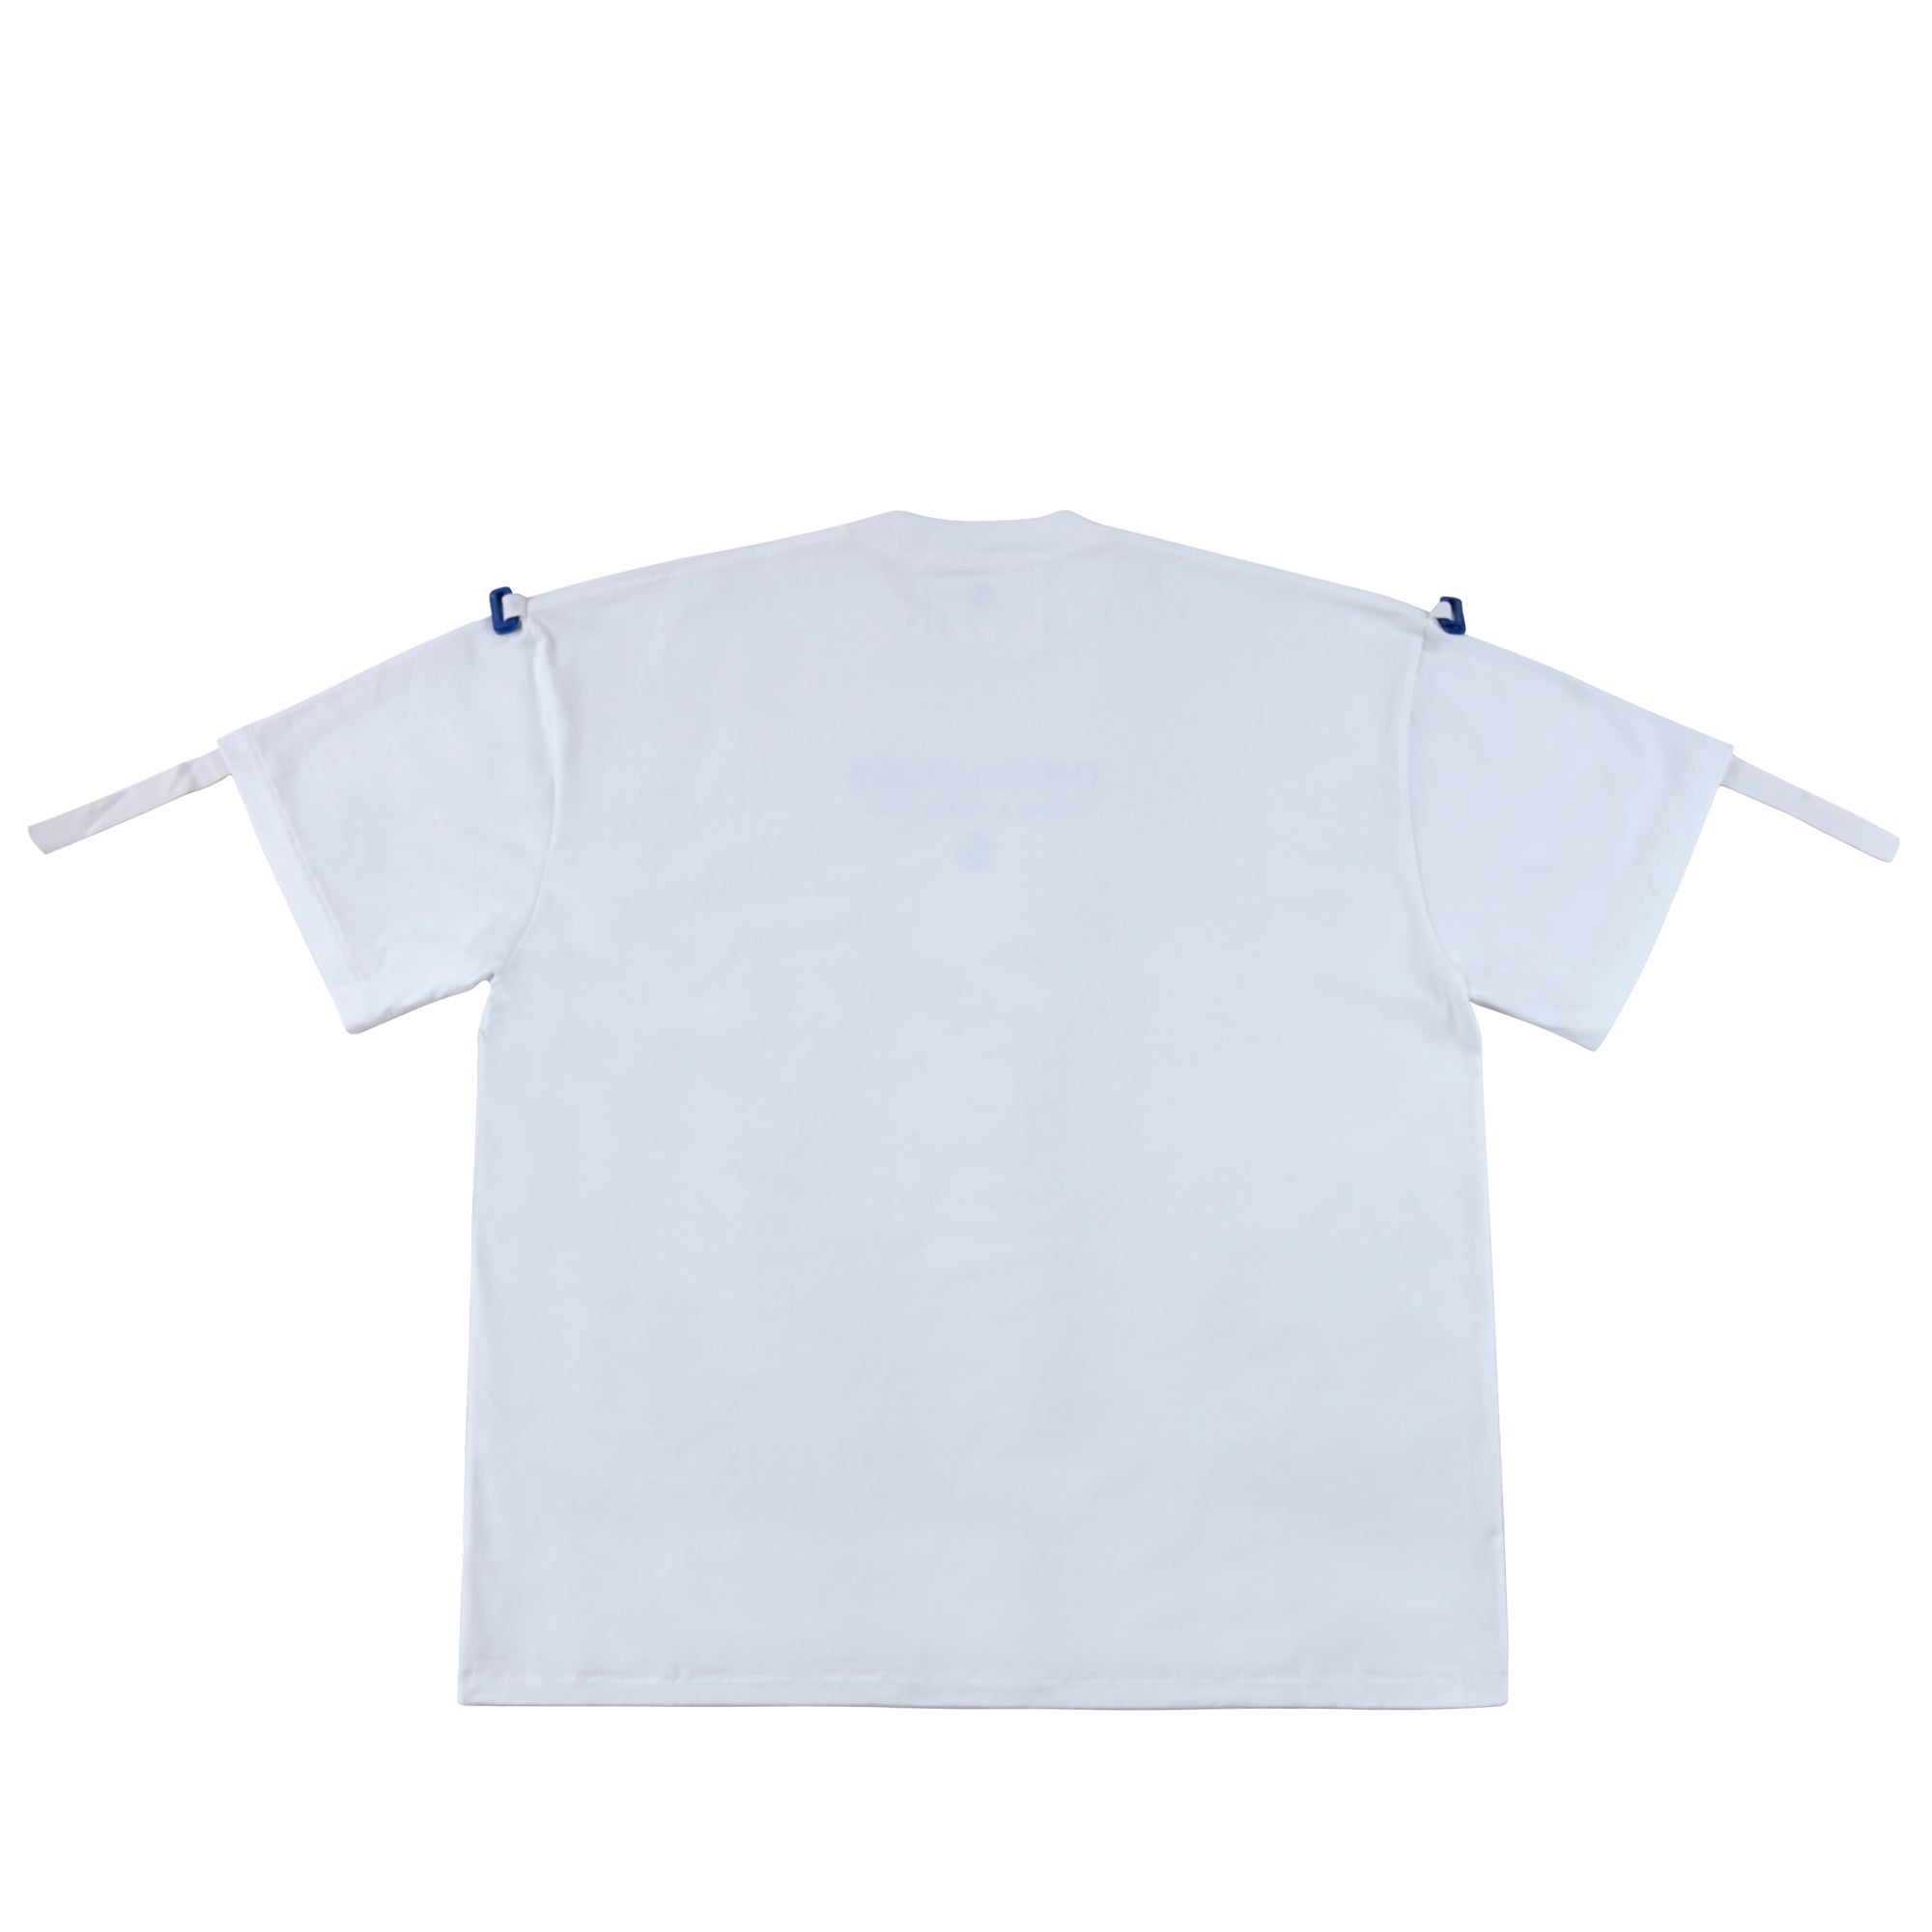 The Salvages AW22 Form & Function D-Ring OS T-Shirt in White